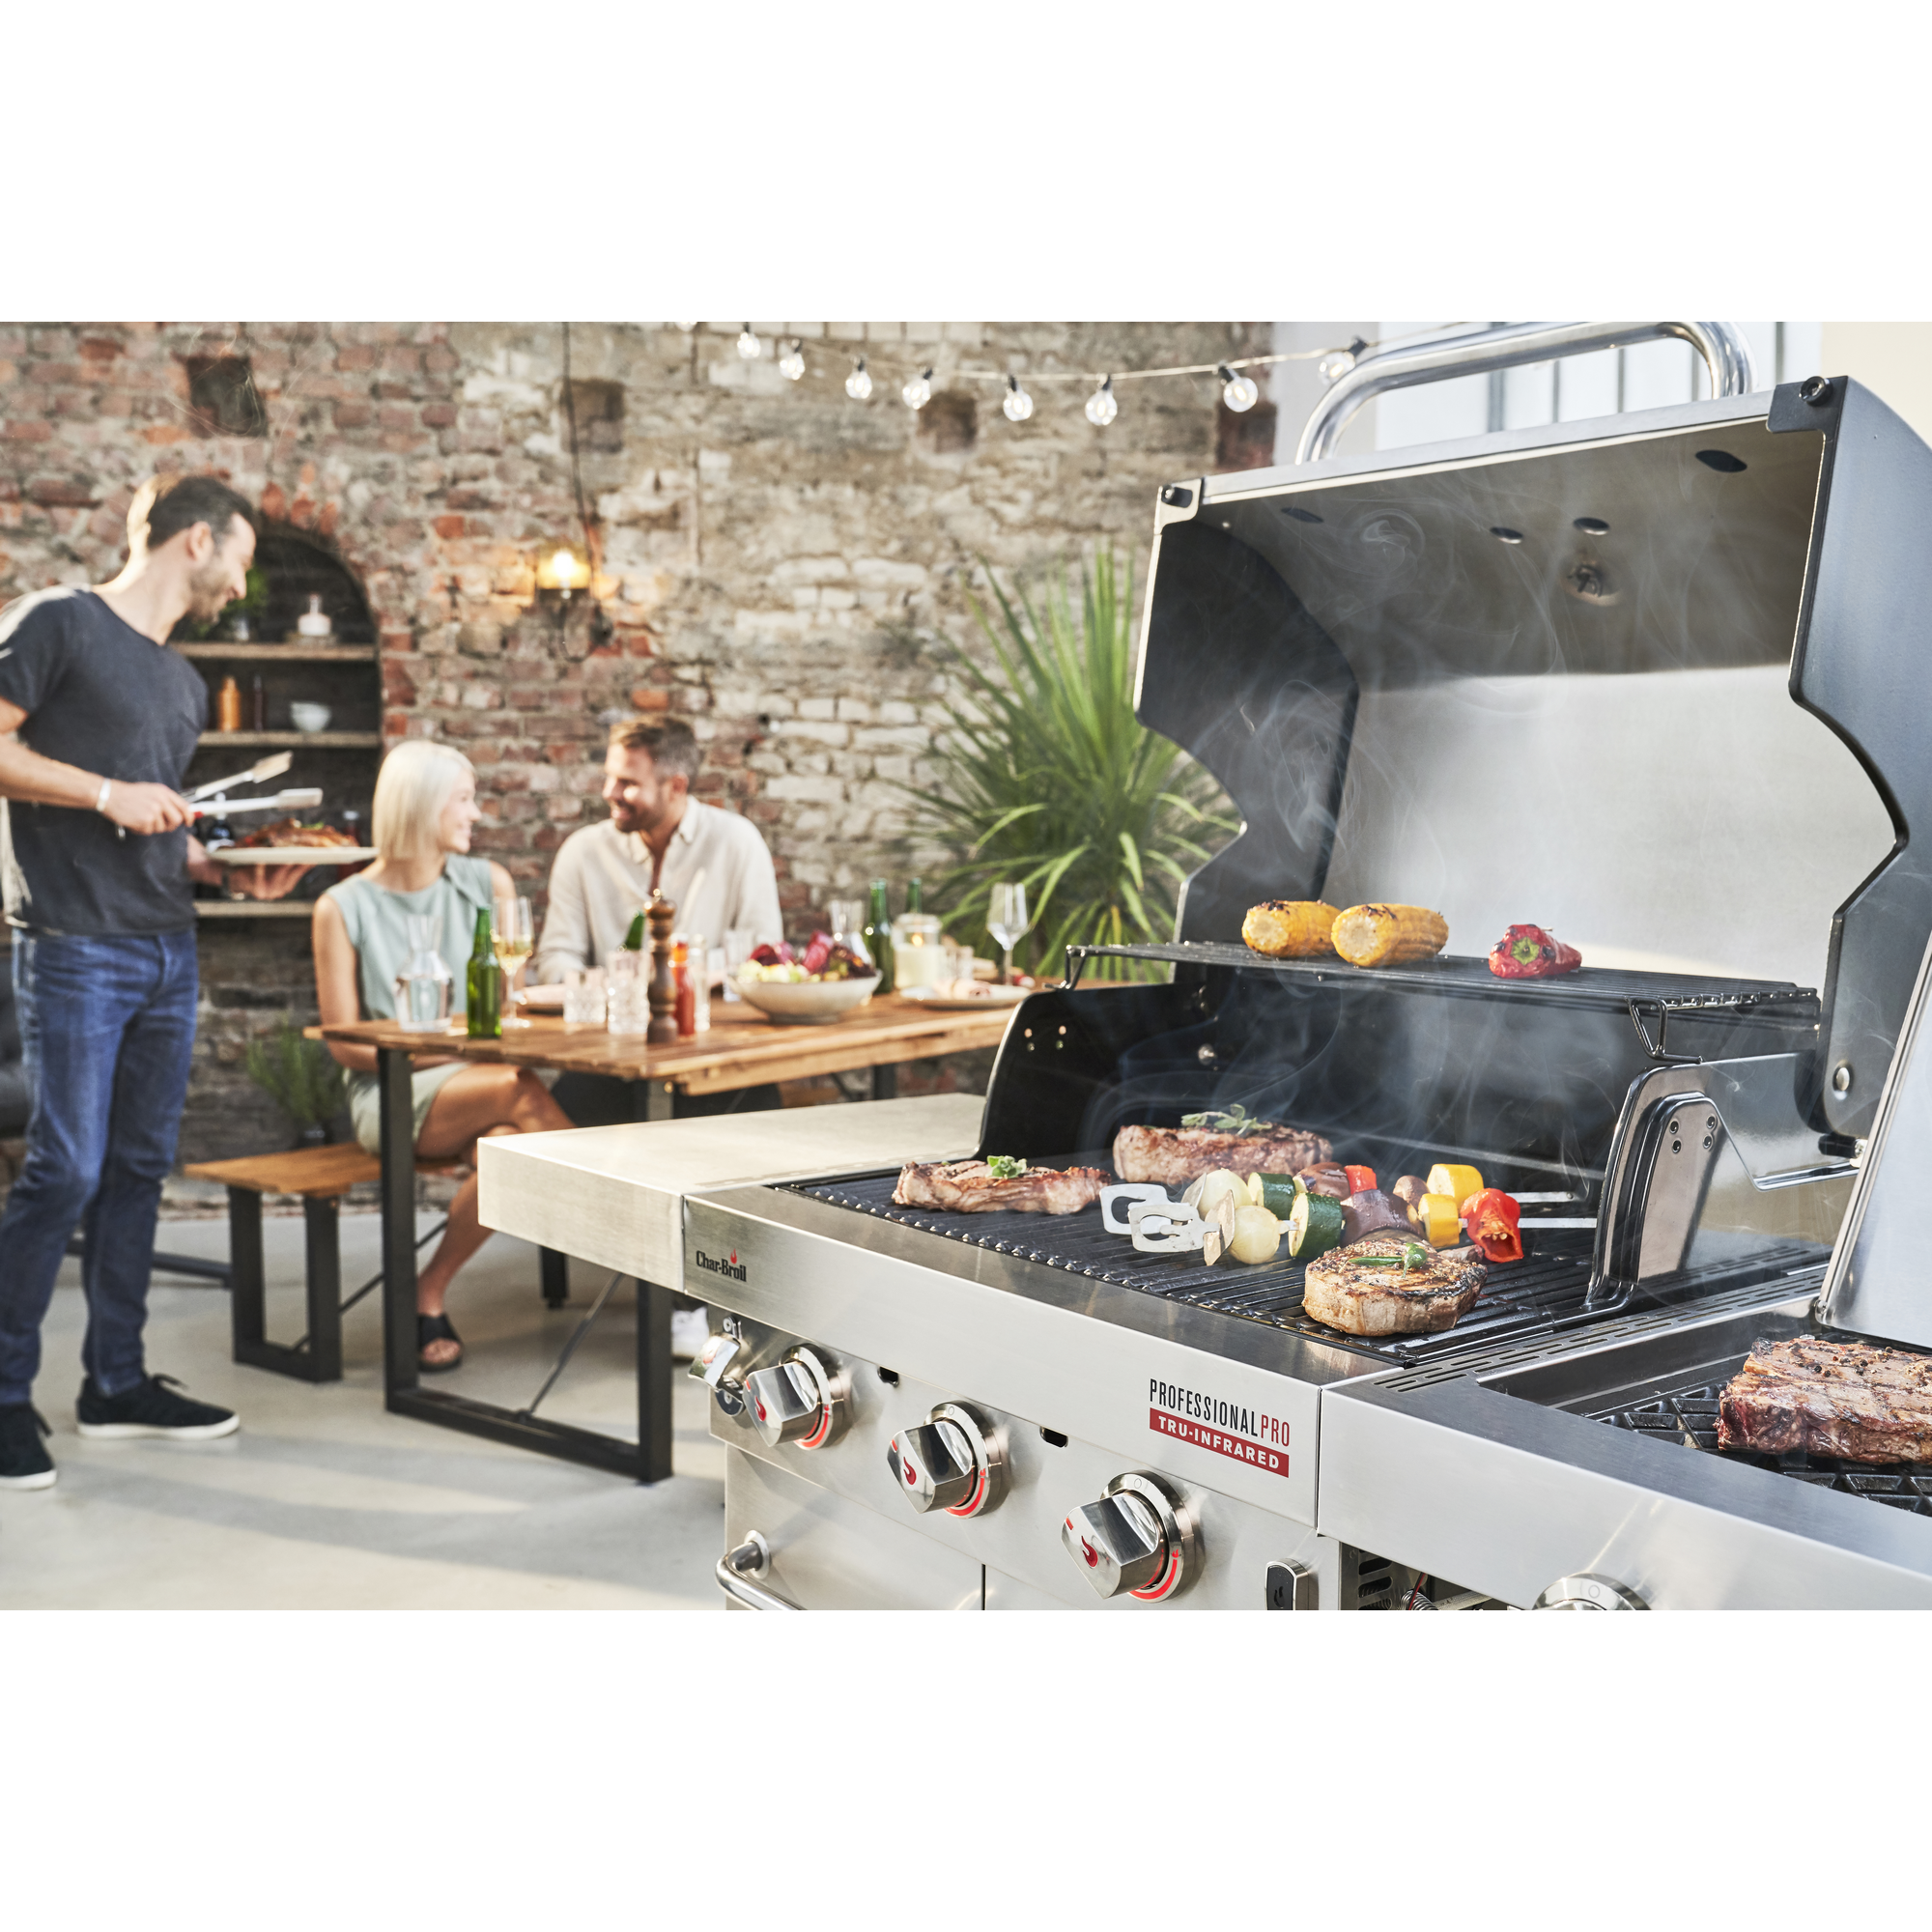 Gasgrill 'Professional Pro S3' mit 3 Brennern + product picture